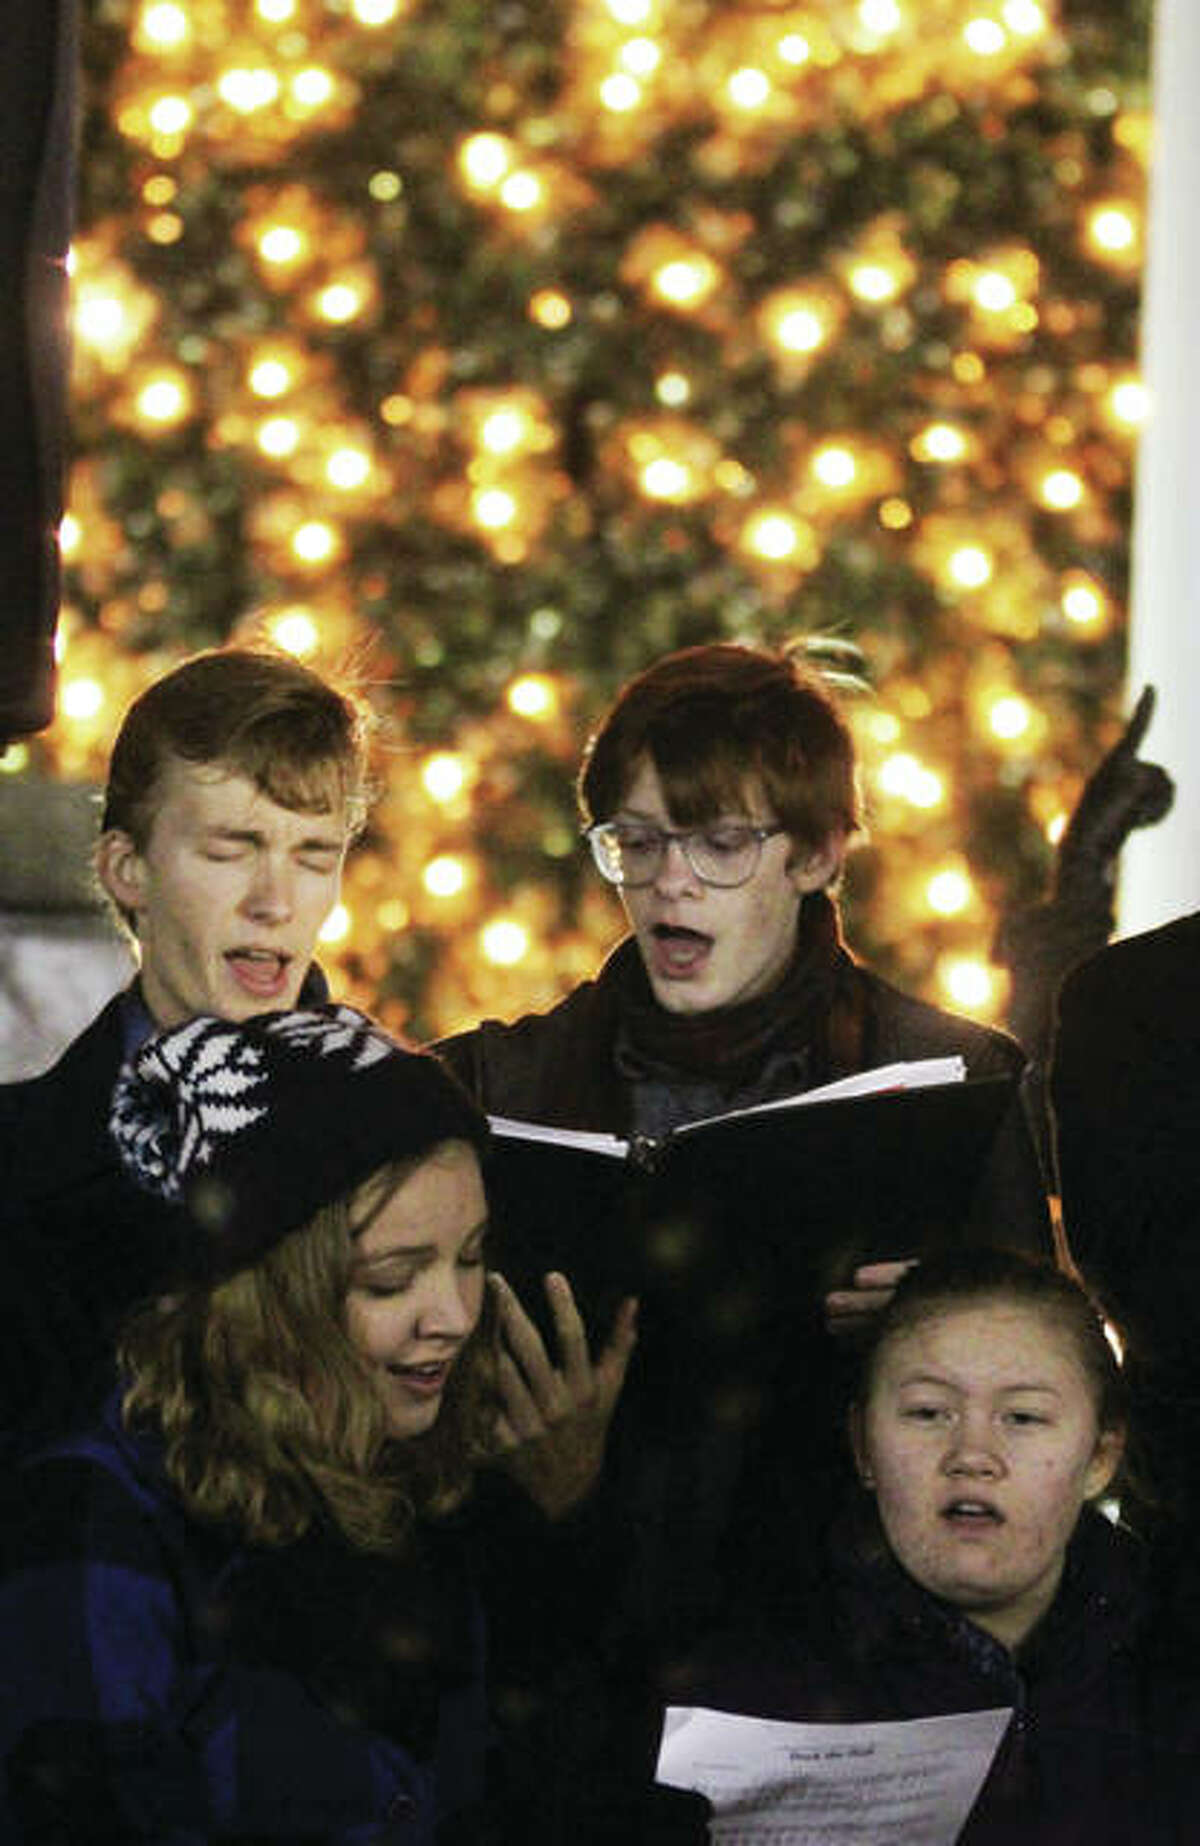 Alton High School Chamber Singers members Kevin Neace, clockwise from top left, Austin Turnbull, Dominique Reinier and Audrey Neace perform Christmas carols during the 23rd annual Christmas Tree Lighting in Lincoln-Douglas Square in downtown Alton. The ceremony drew about 250 people, and is sponsored by Alton Main Street.